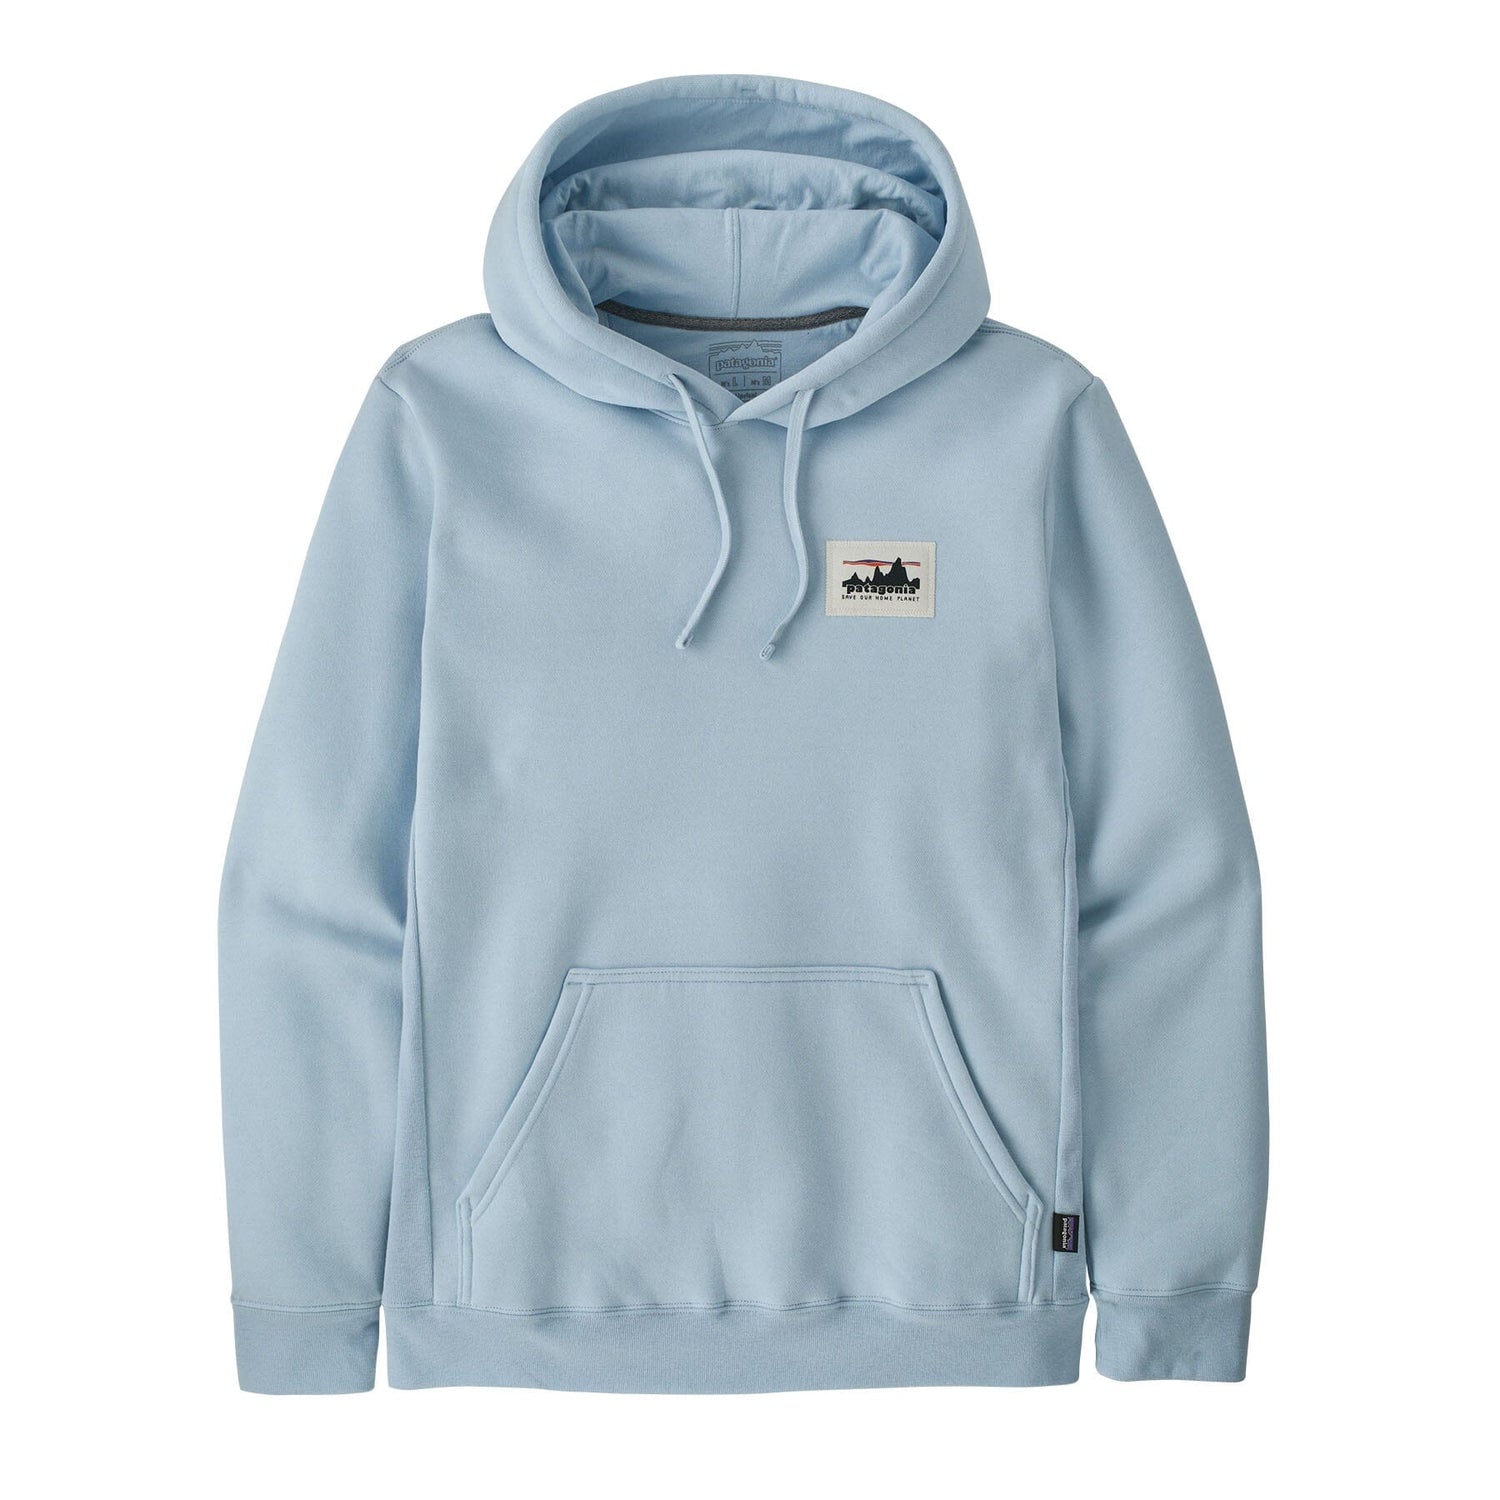 Patagonia Unisex '73 Skyline Uprisal Hoody - Recycled Polyester & Recycled Cotton Chilled Blue Shirt